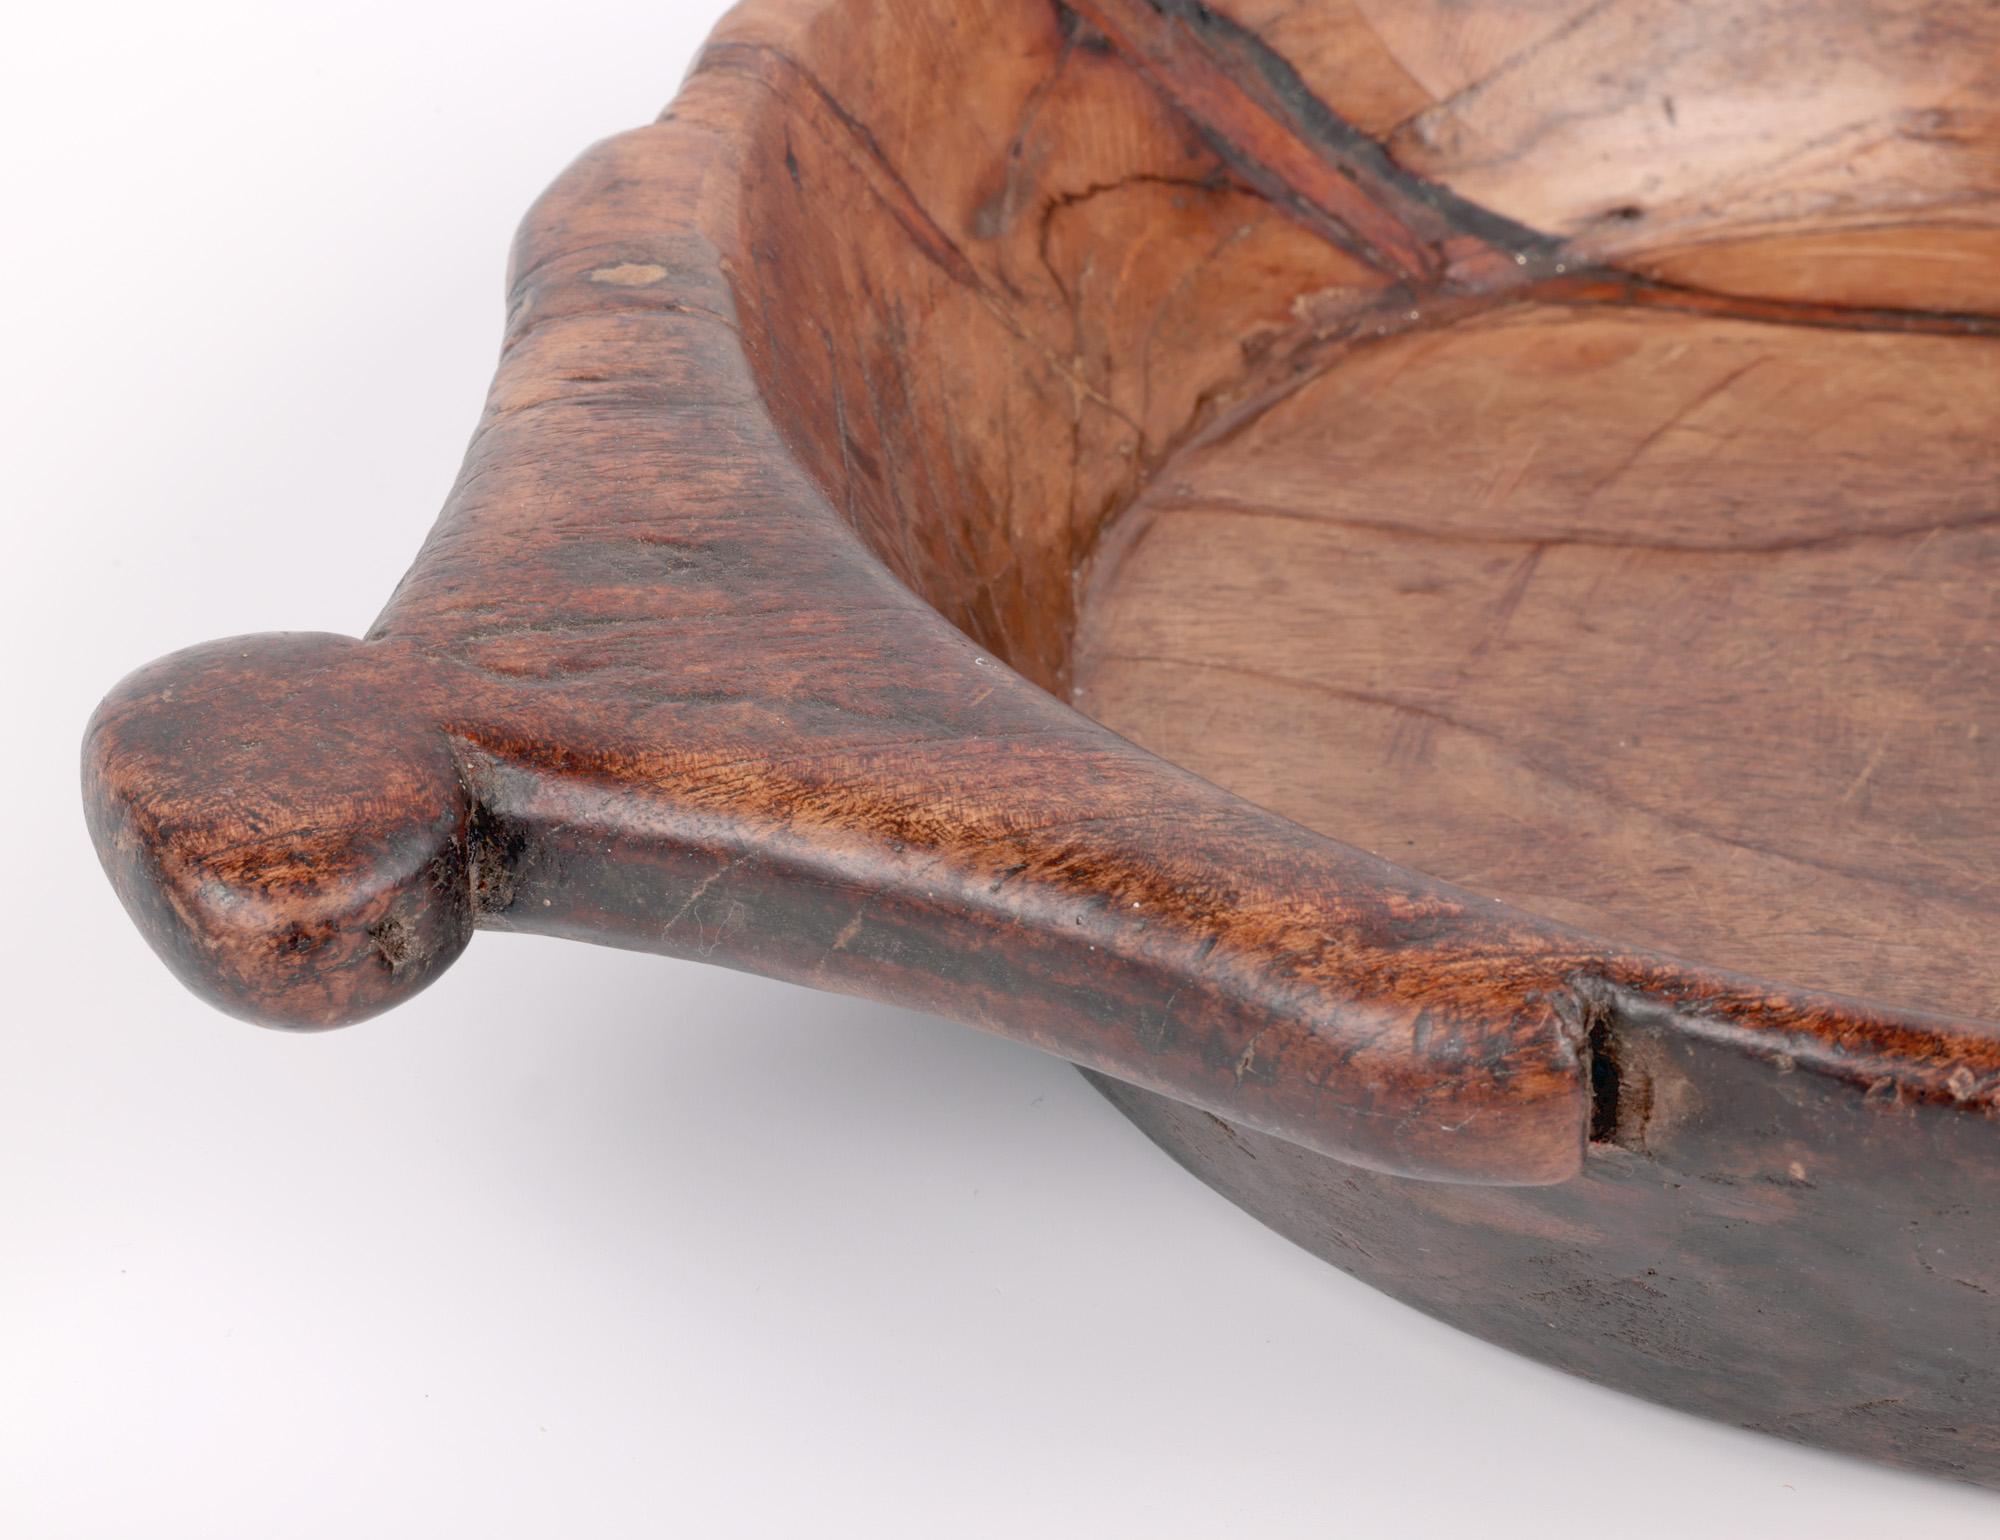 A stylish vintage African hand-carved twin handled wooden bowl dating from the early to mid-20th century. The bowl is made from a single piece of native wood and is of wide shallow round shape with shaped flat handles carved to two sides. The bowl